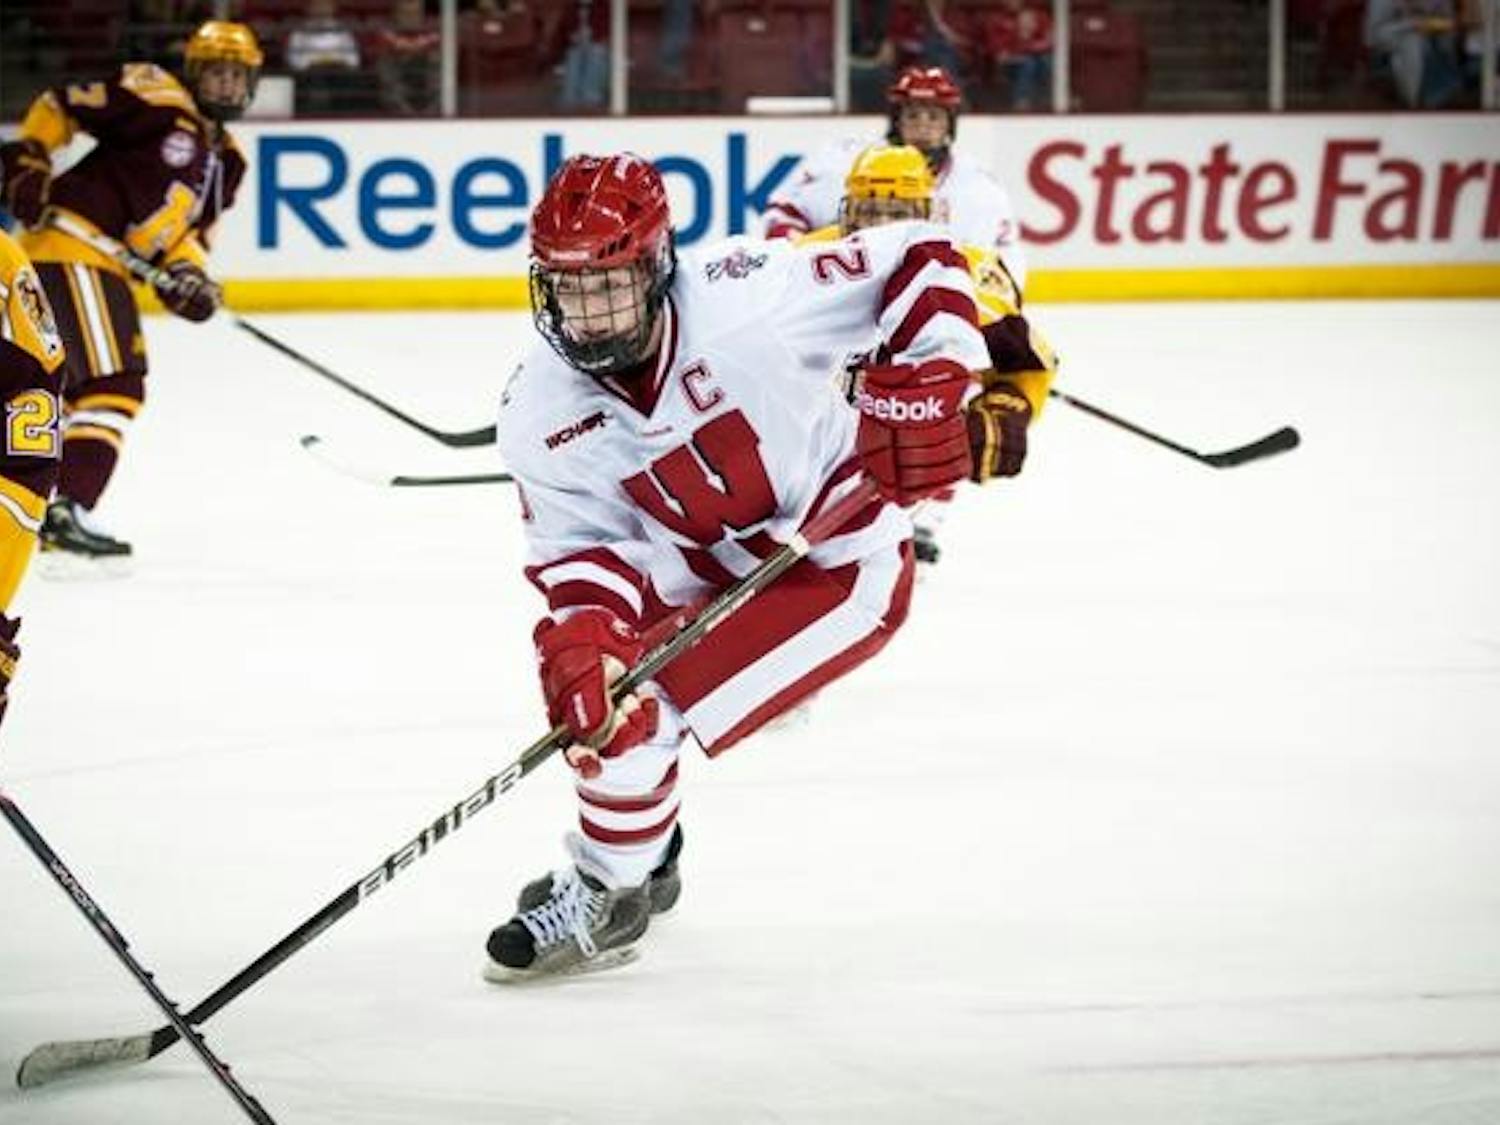 Clash of titans in Duluth: Wisconsin takes on Bulldogs in first road series